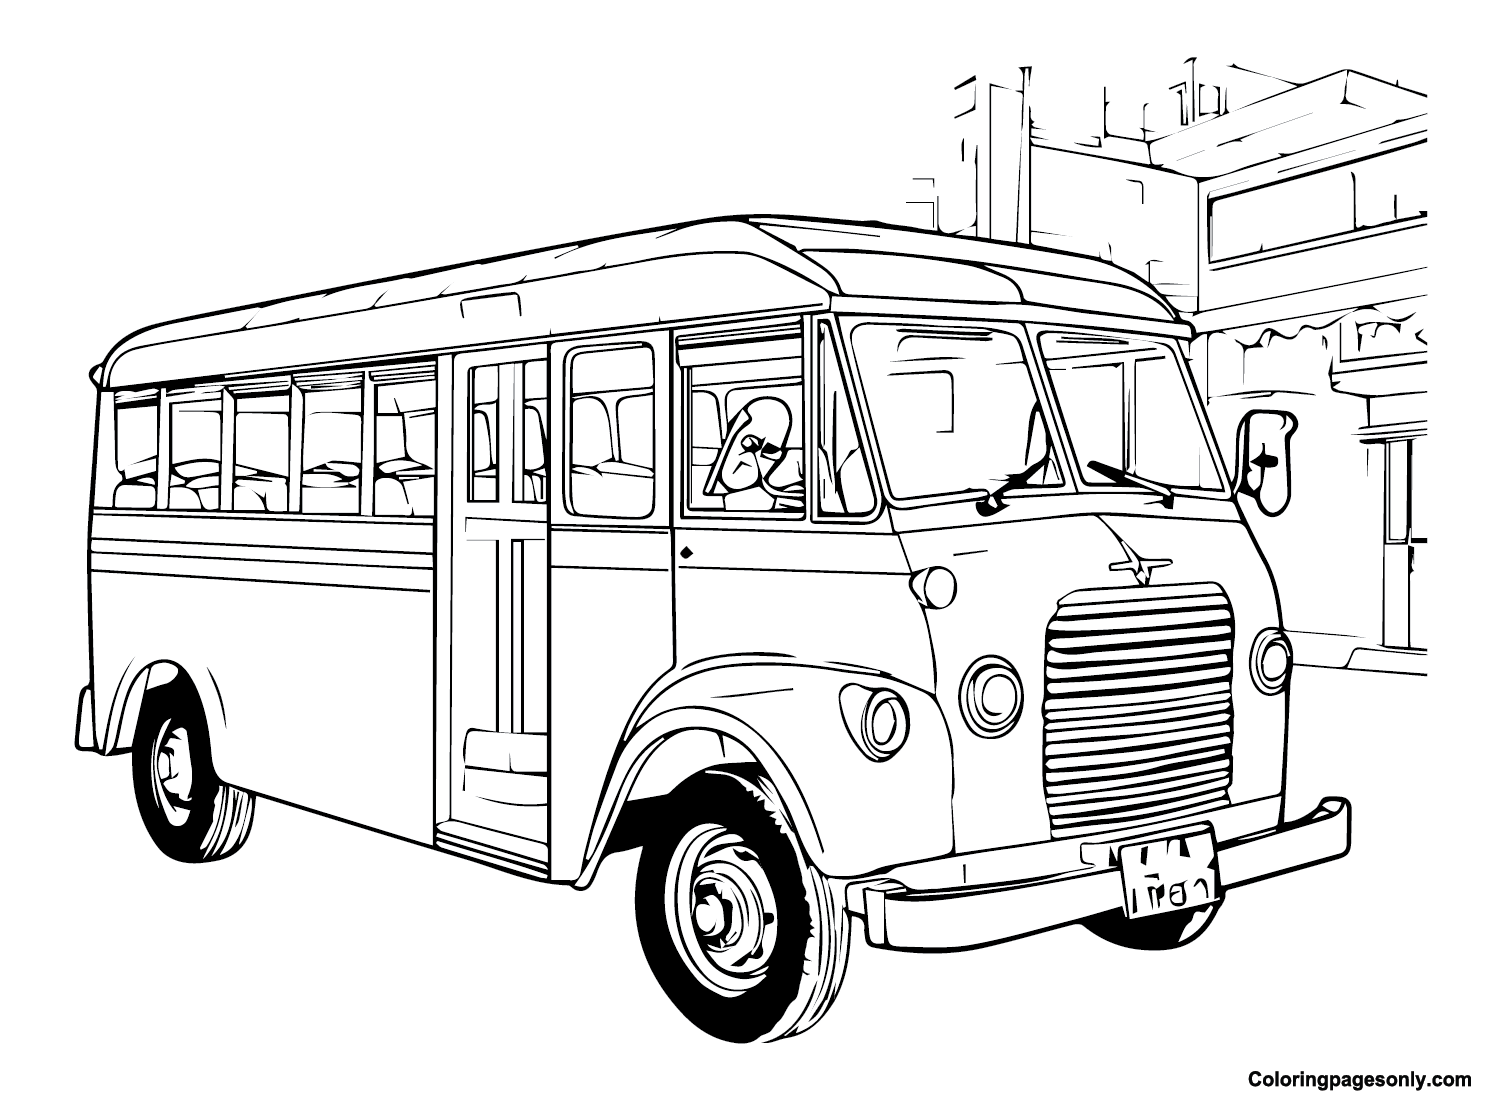 Jeepney Philippines Images Coloring Page